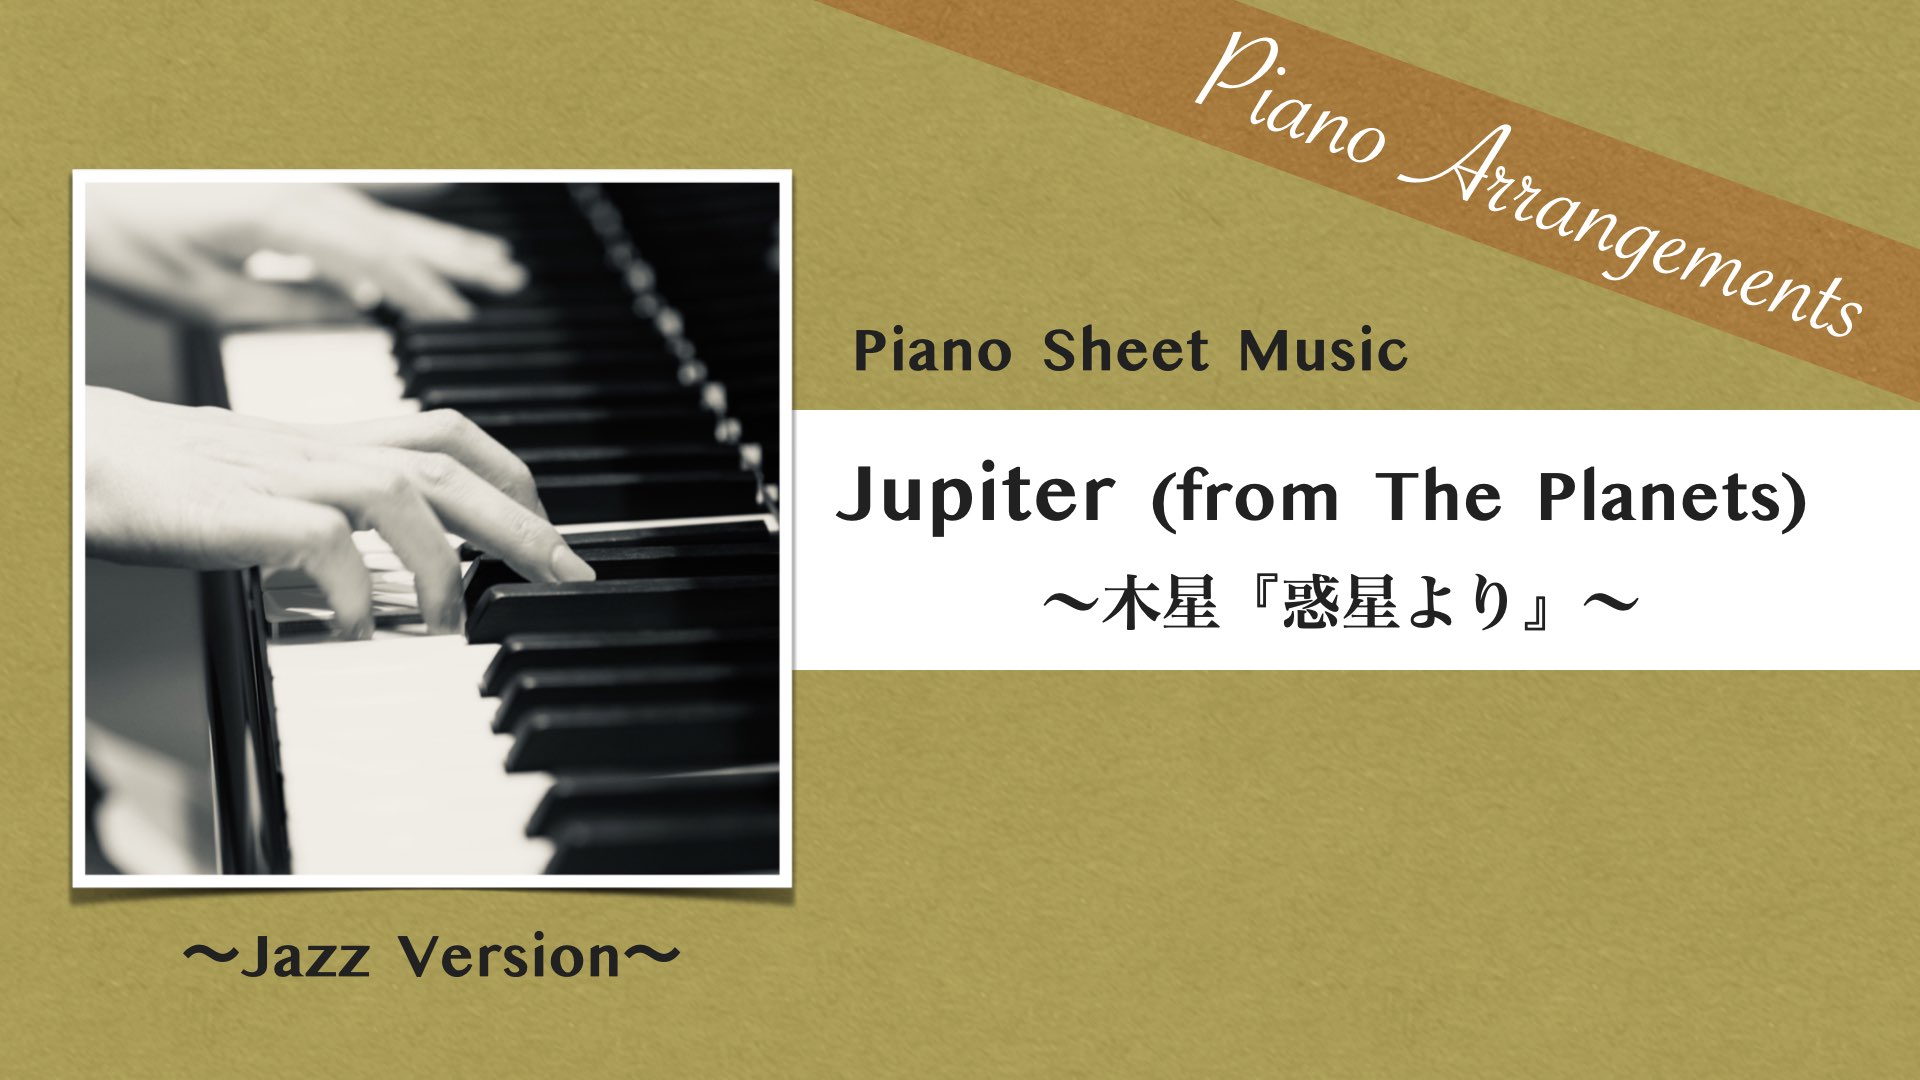 Jupiter (from The Planets)/Jazz Style【Piano Sheet Music】